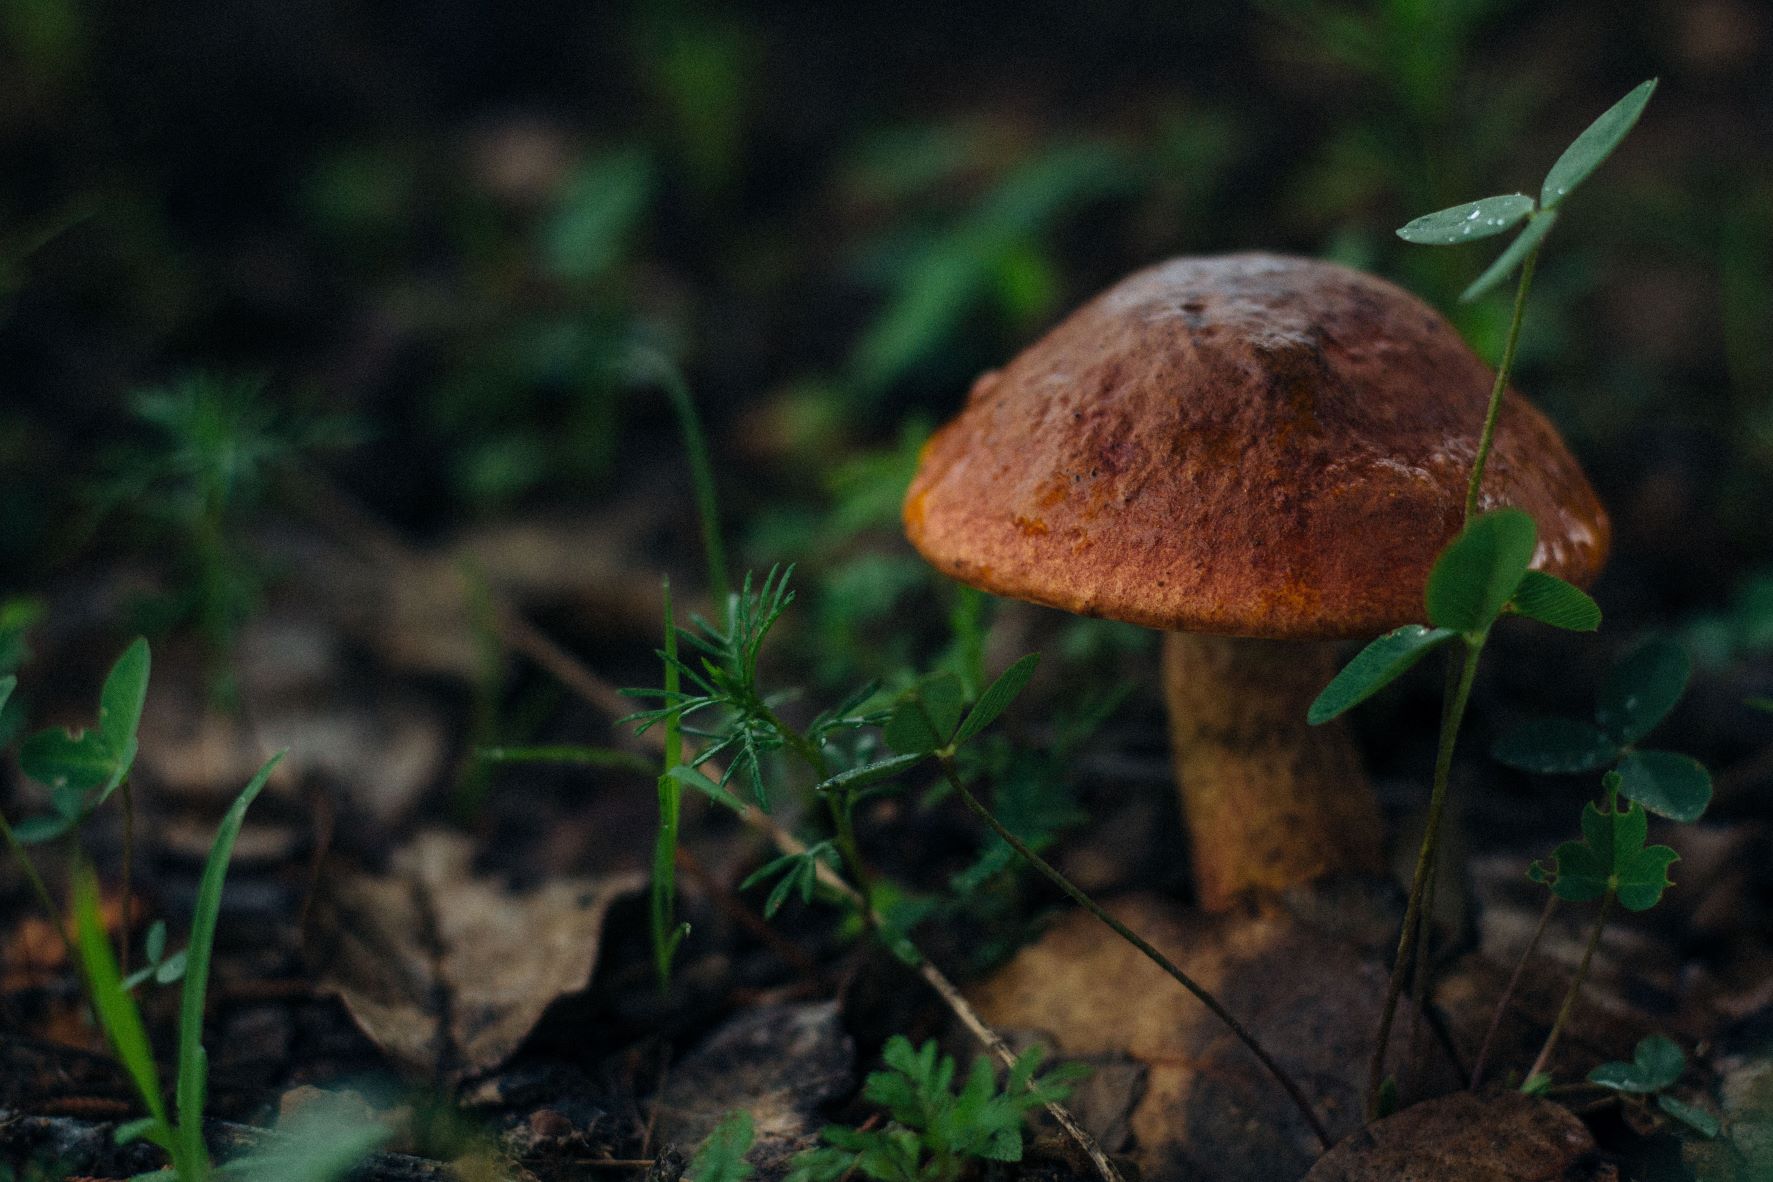 Mushroom in the forest - Photo by Adolfo Félix on Unsplash